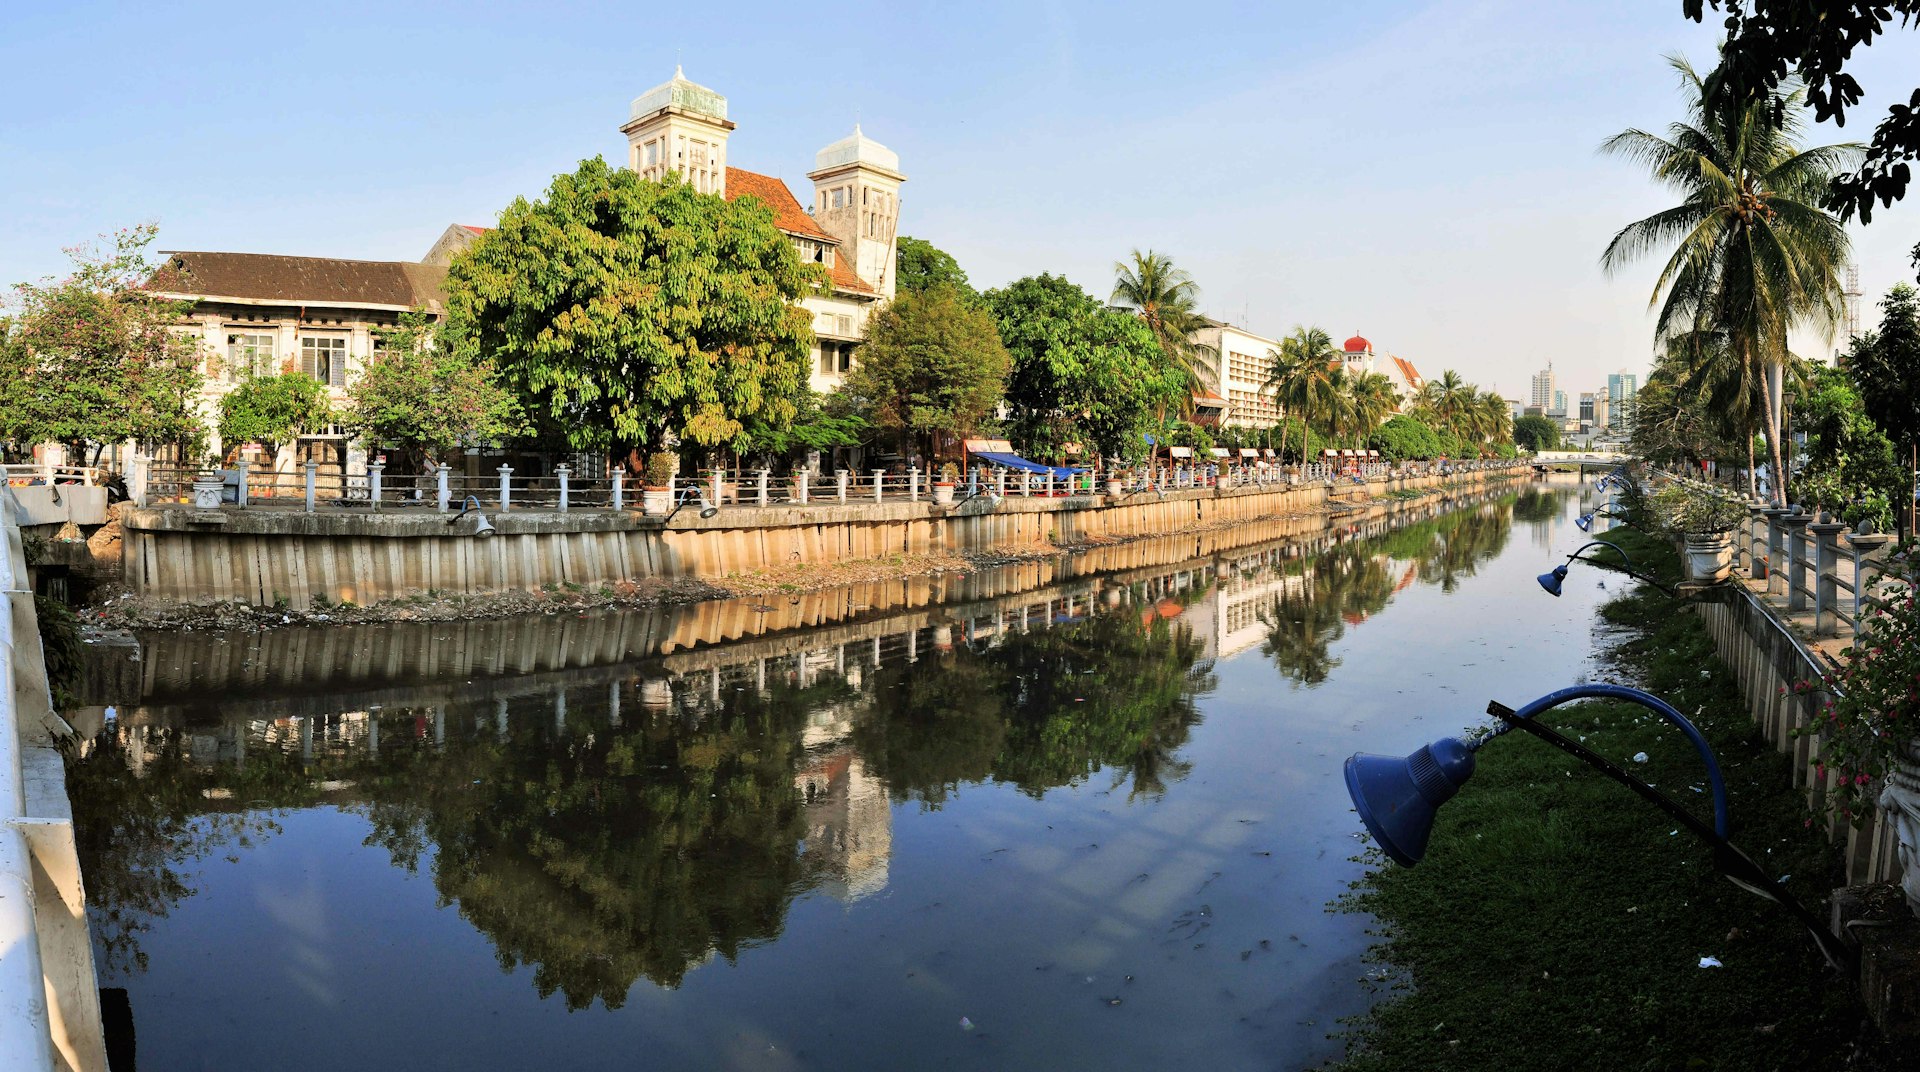 Features - Dutch colonial architecture along a canal in Kota, Jakarta, Indonesia